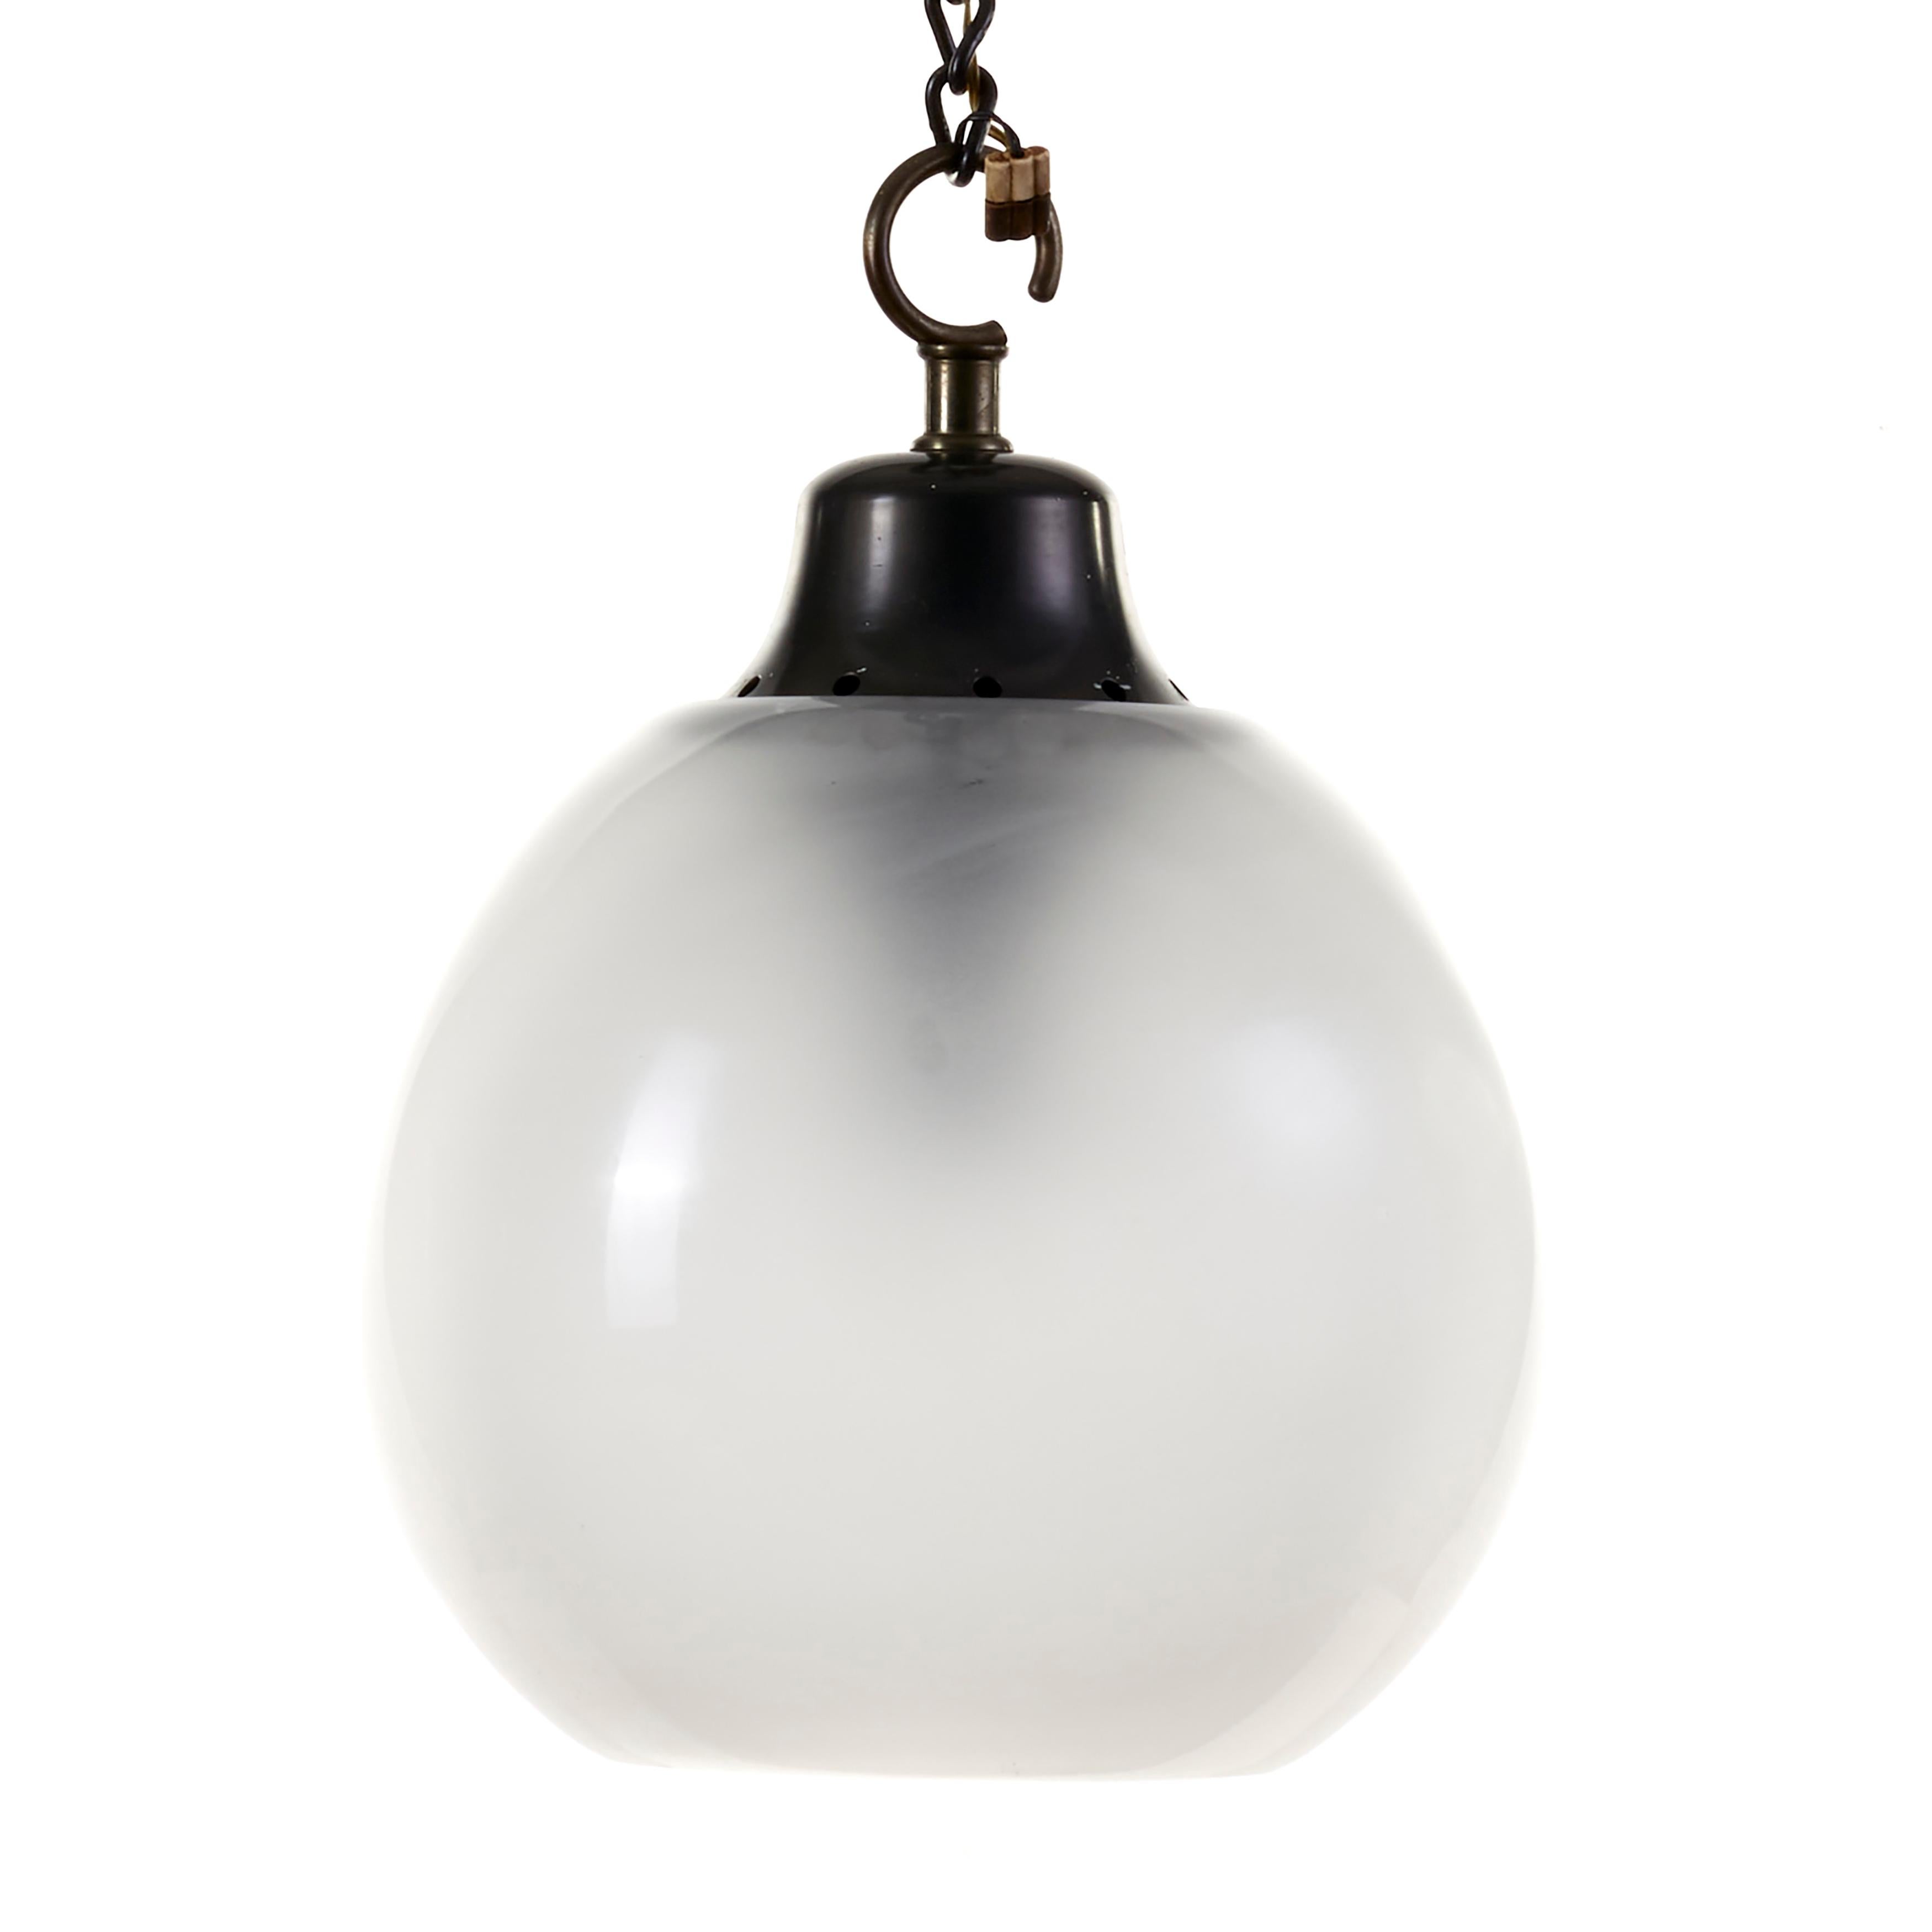 Luigi Caccia Dominioni for Azucena pendant or suspension lamp model LS10 Boccia with globe lampshade in frosted blown Murano crystal glass suspended on double hook in burnished iron and original black aluminum chain and canopy with custom ceiling